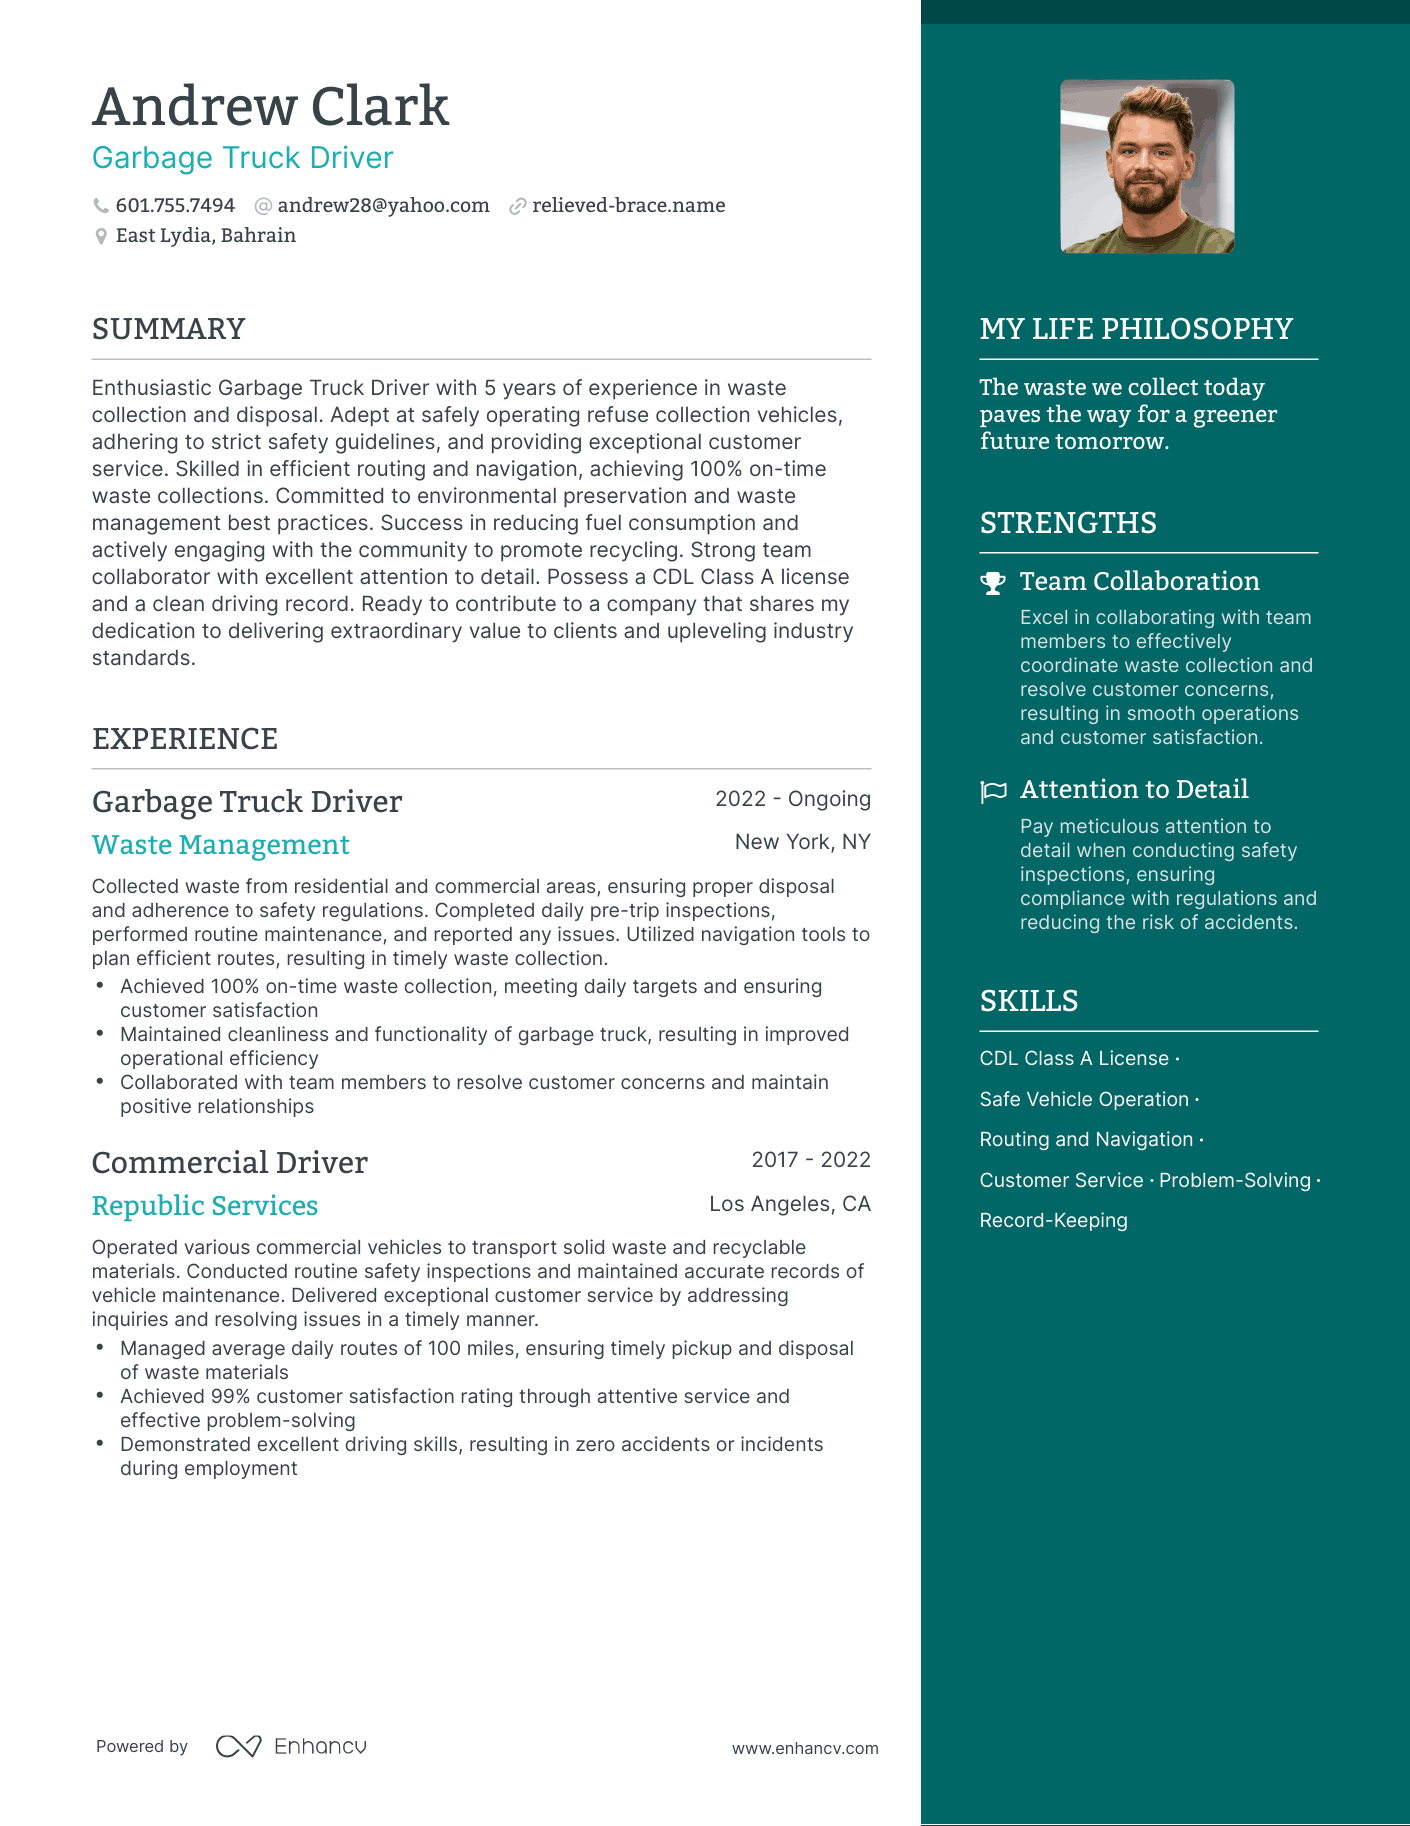 Garbage Truck Driver resume example